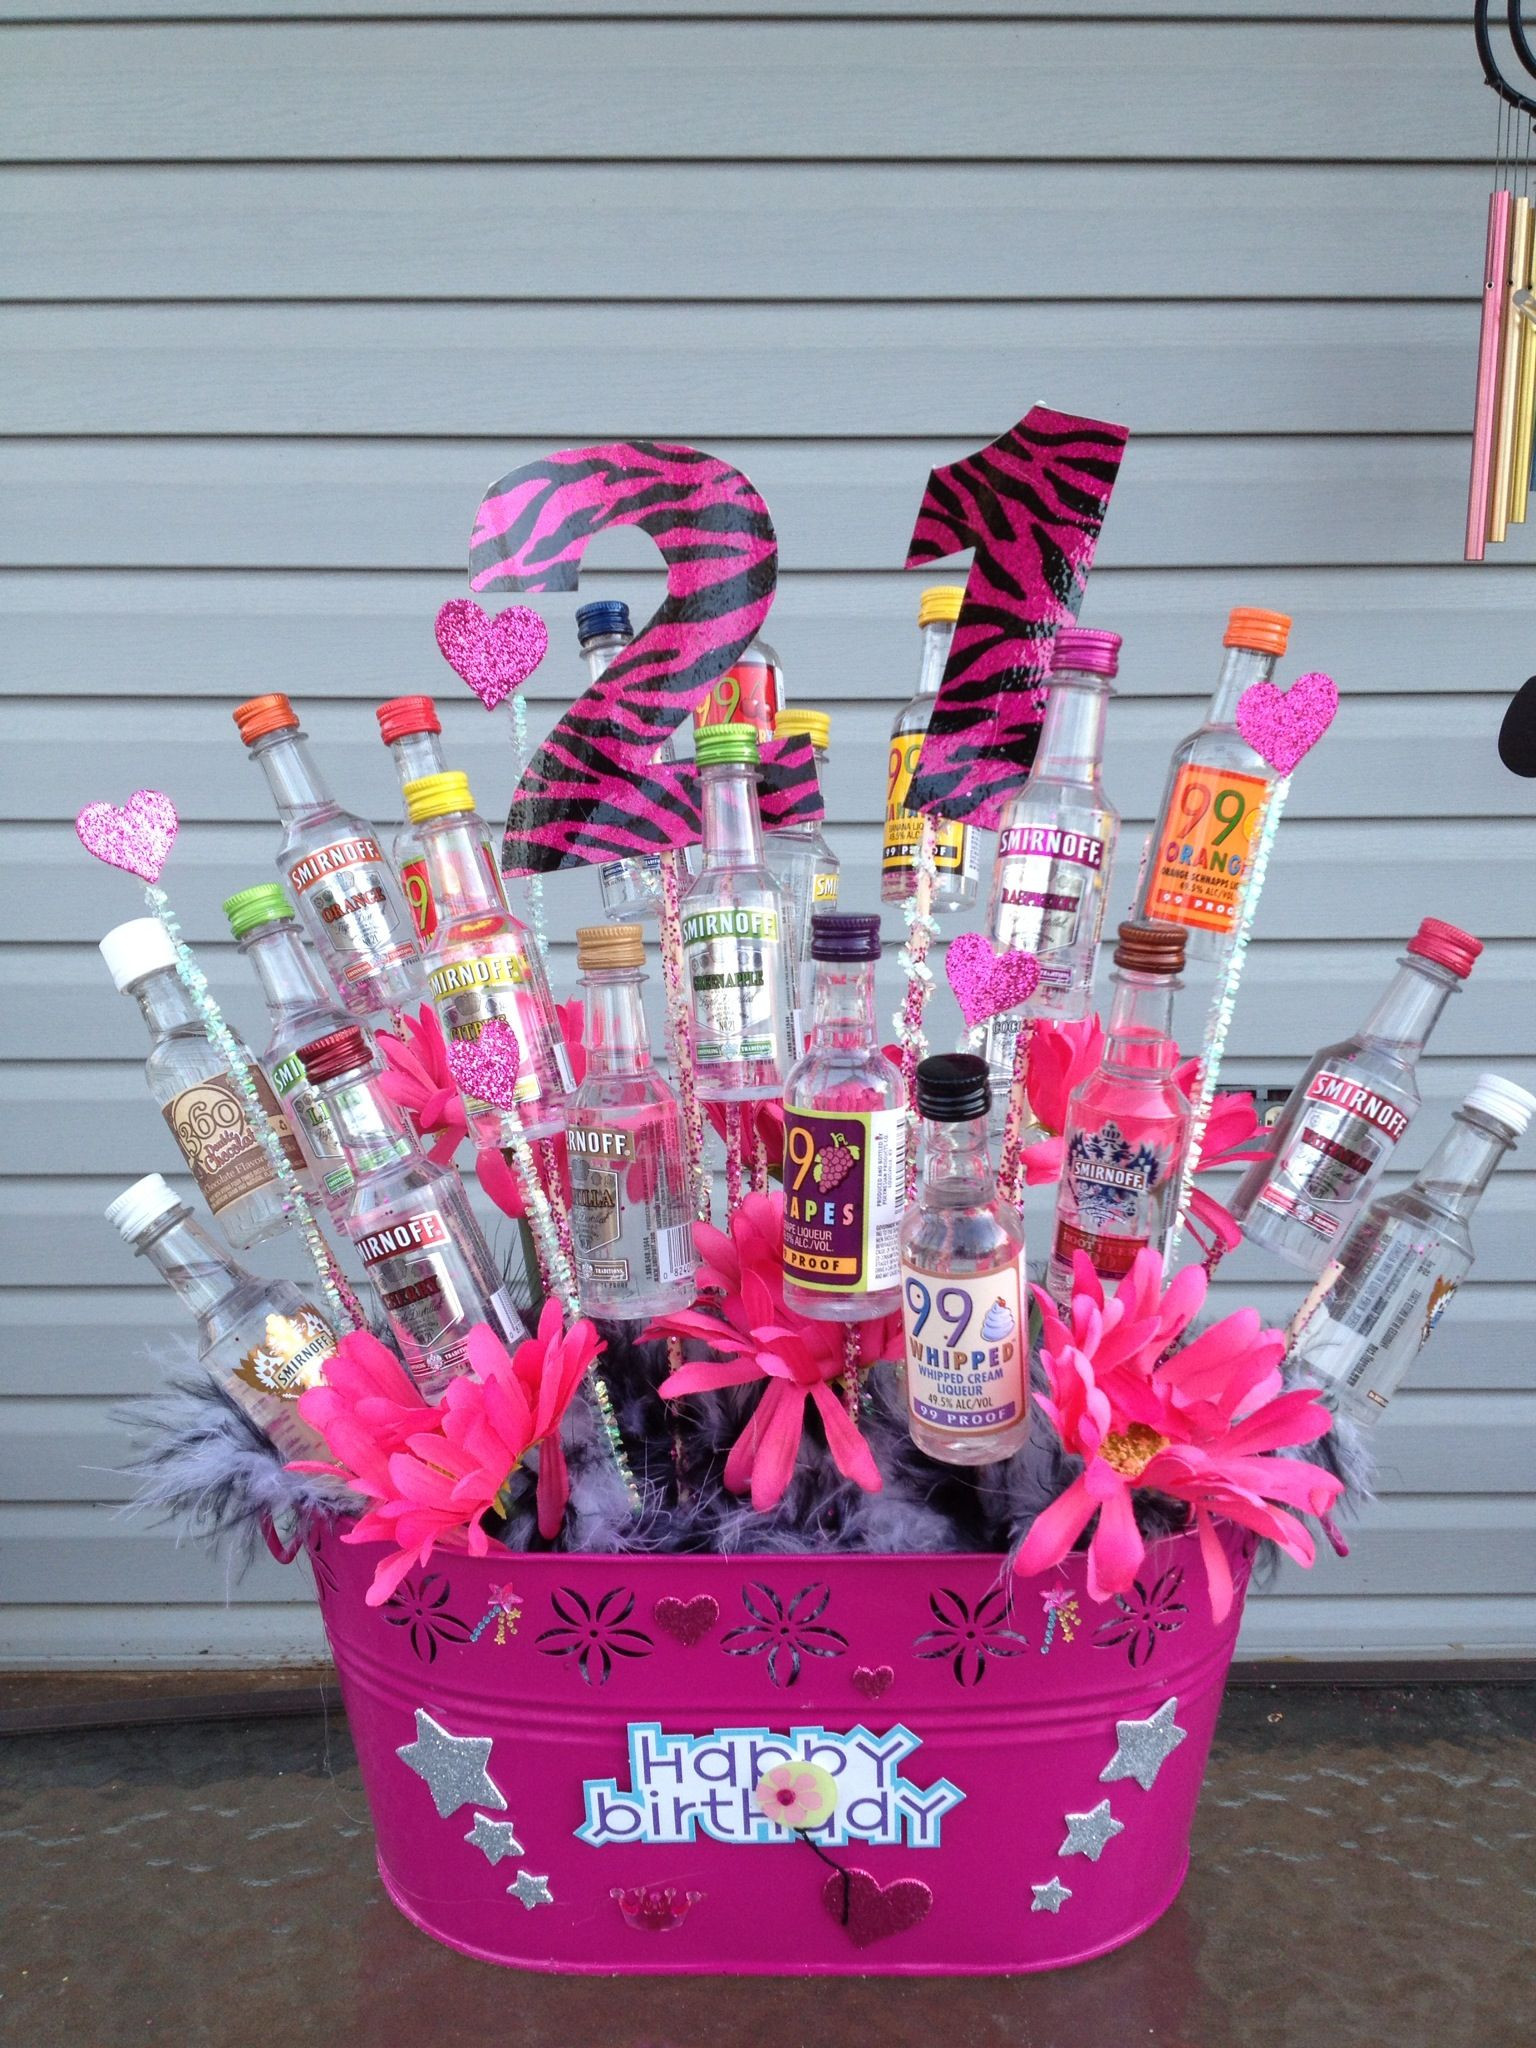 Diy Gift Basket Ideas For Her
 Great t idea easy to make 21st Birthday t idea